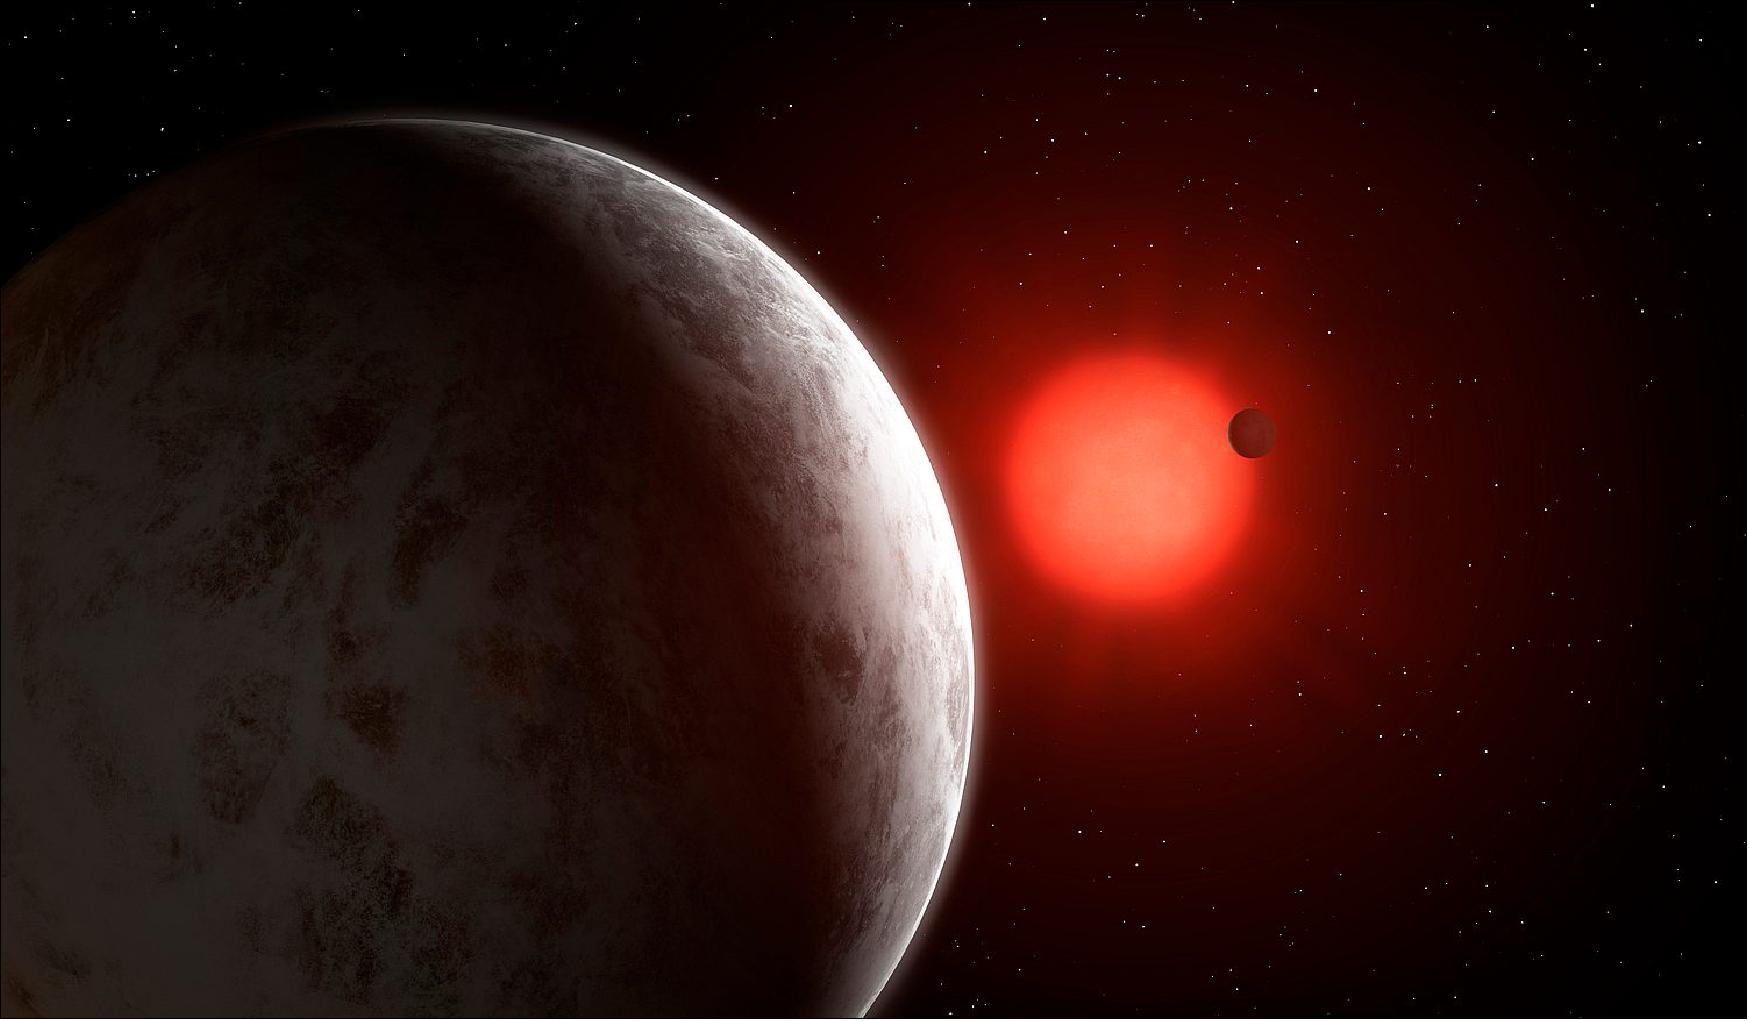 Figure 12: Artist’s impression of the multiplanetary system of newly discovered super-Earths orbiting nearby red dwarf Gliese 887 (image credit: Mark Garlick)